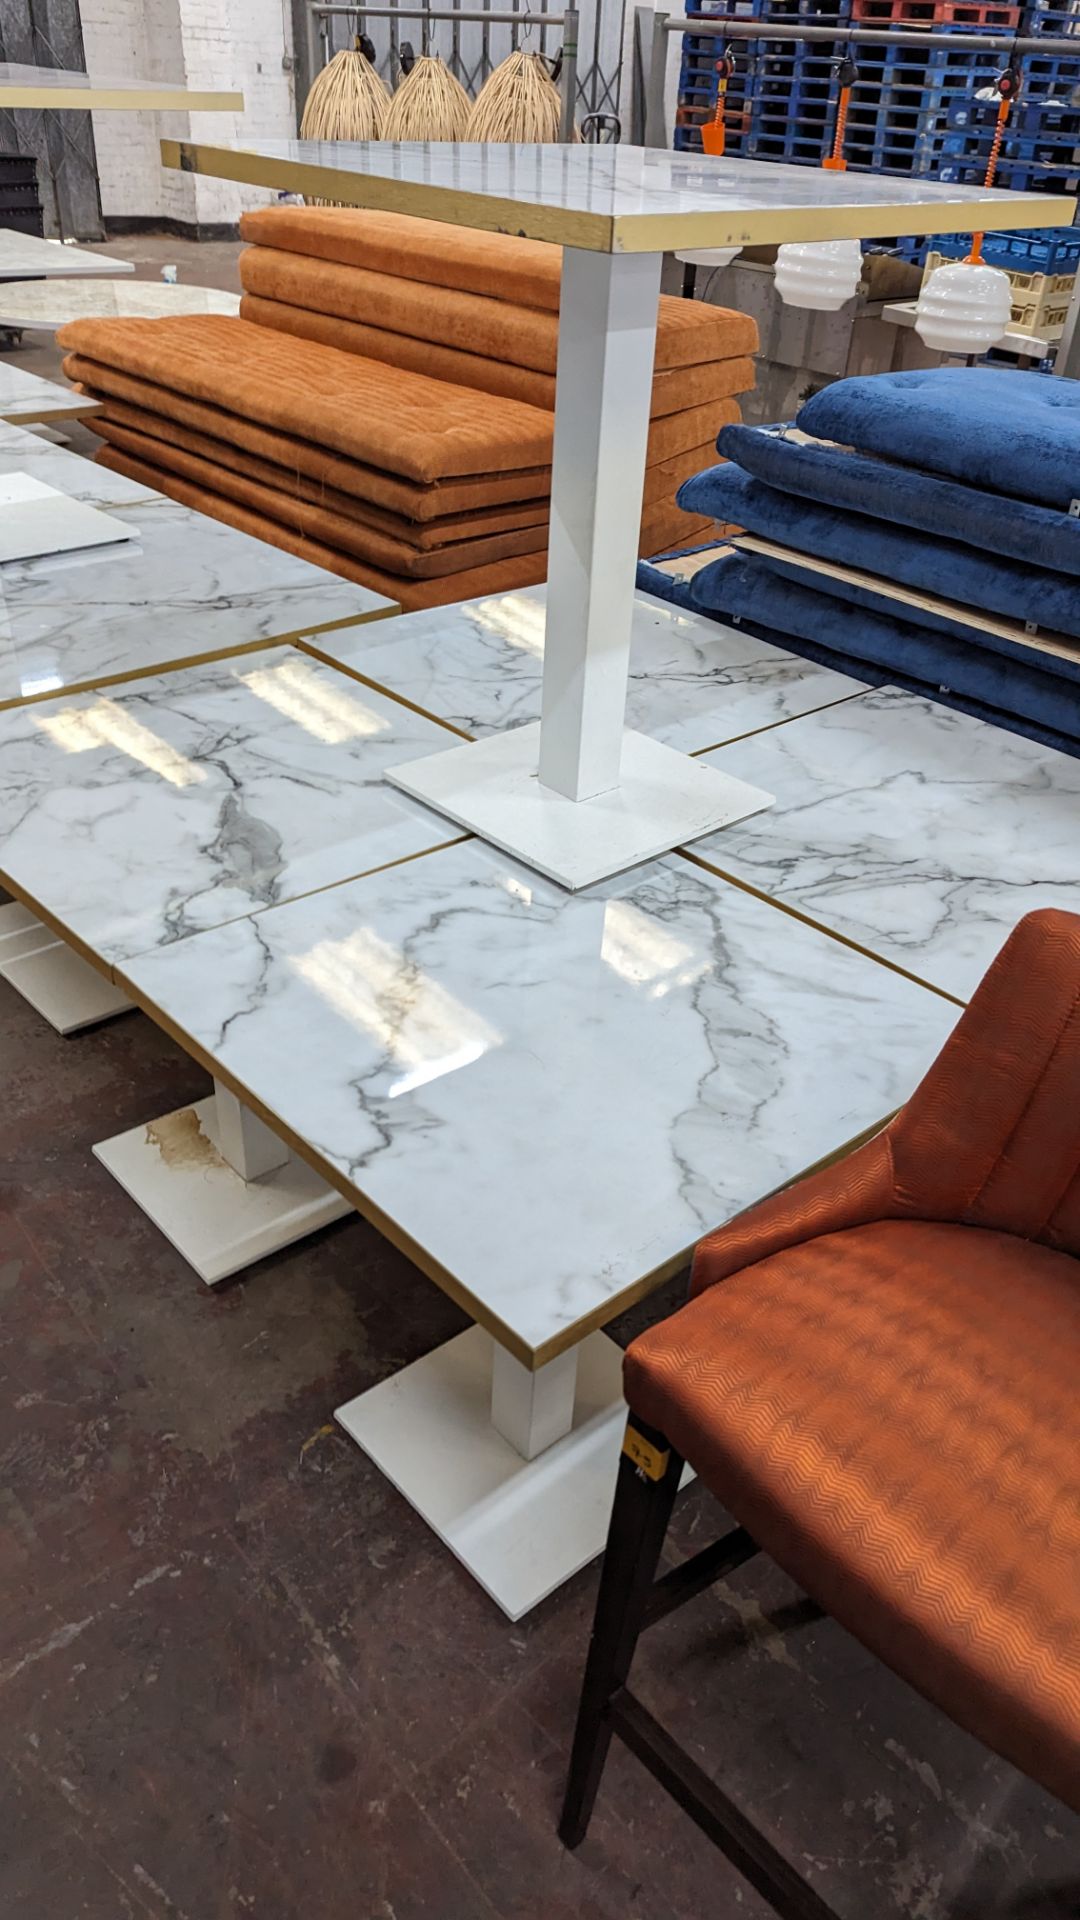 10 off matching dining tables in 3 different sizes with marble effect tops. 2 of the tables are ret - Image 18 of 19